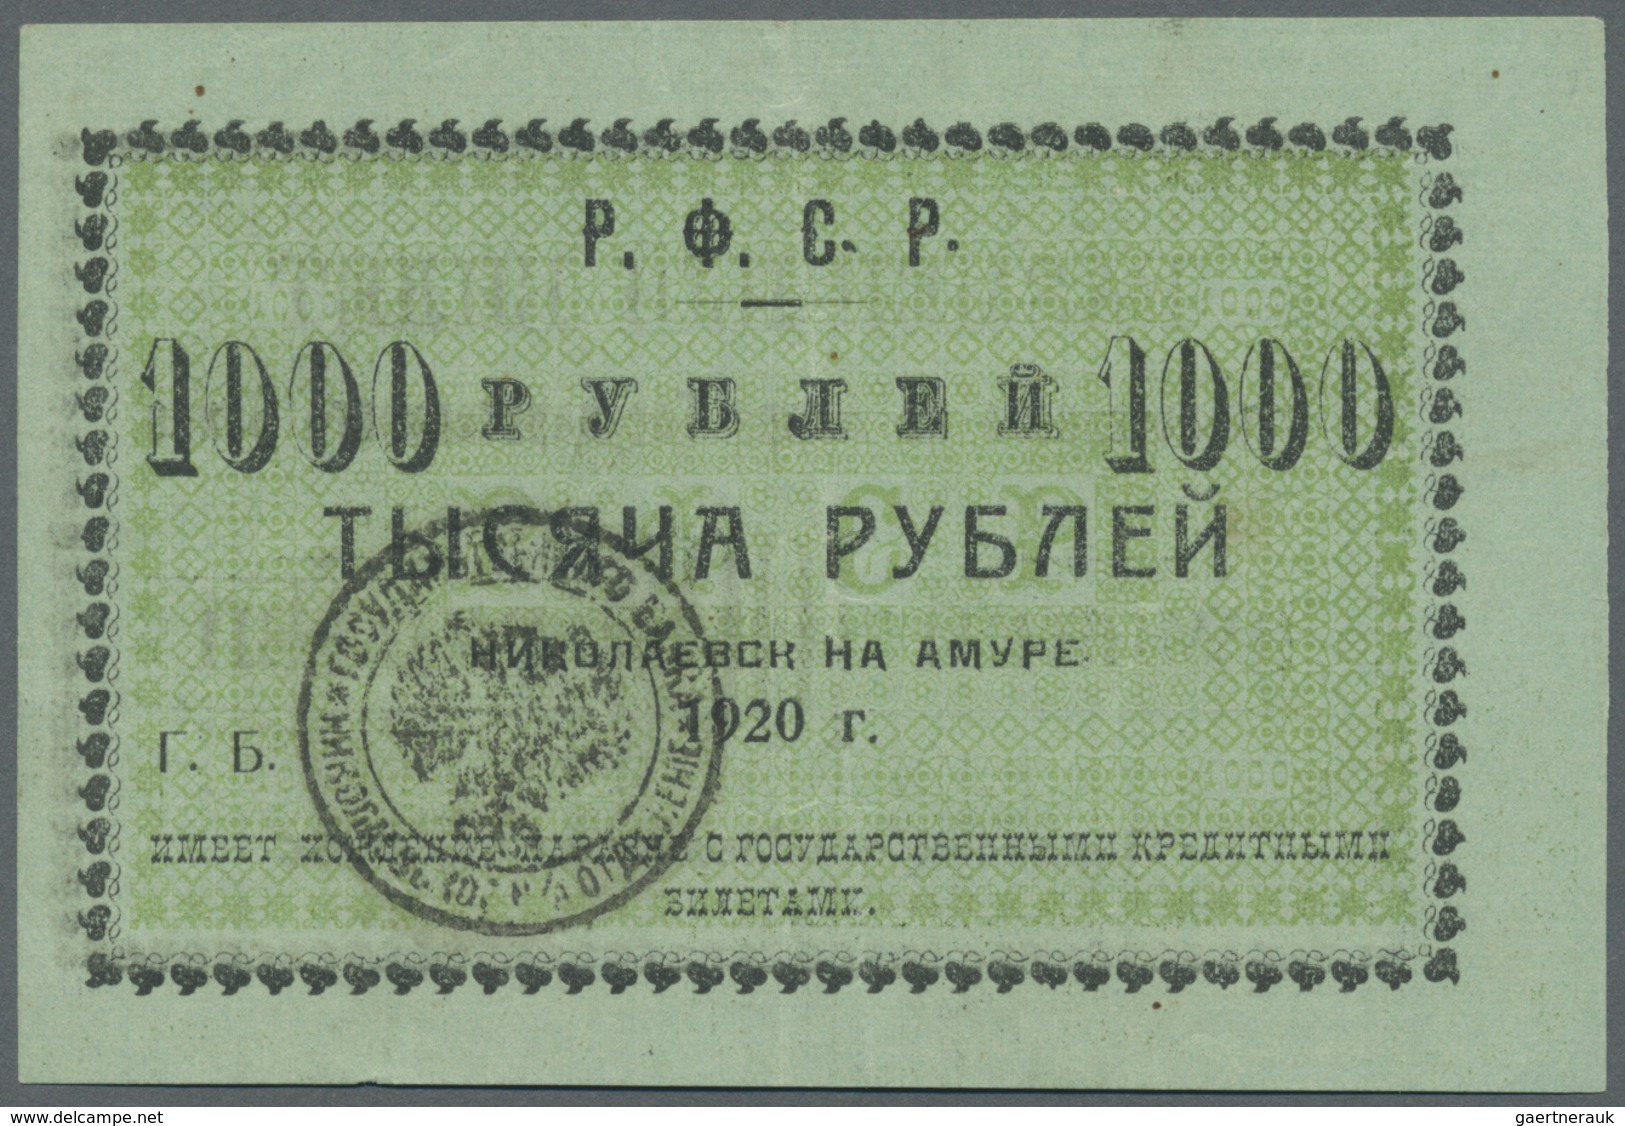 Russia / Russland: Siberia 1000 Rubles 1920 P. S1293b With Light Folds In Paper In Condition: VF. - Russia